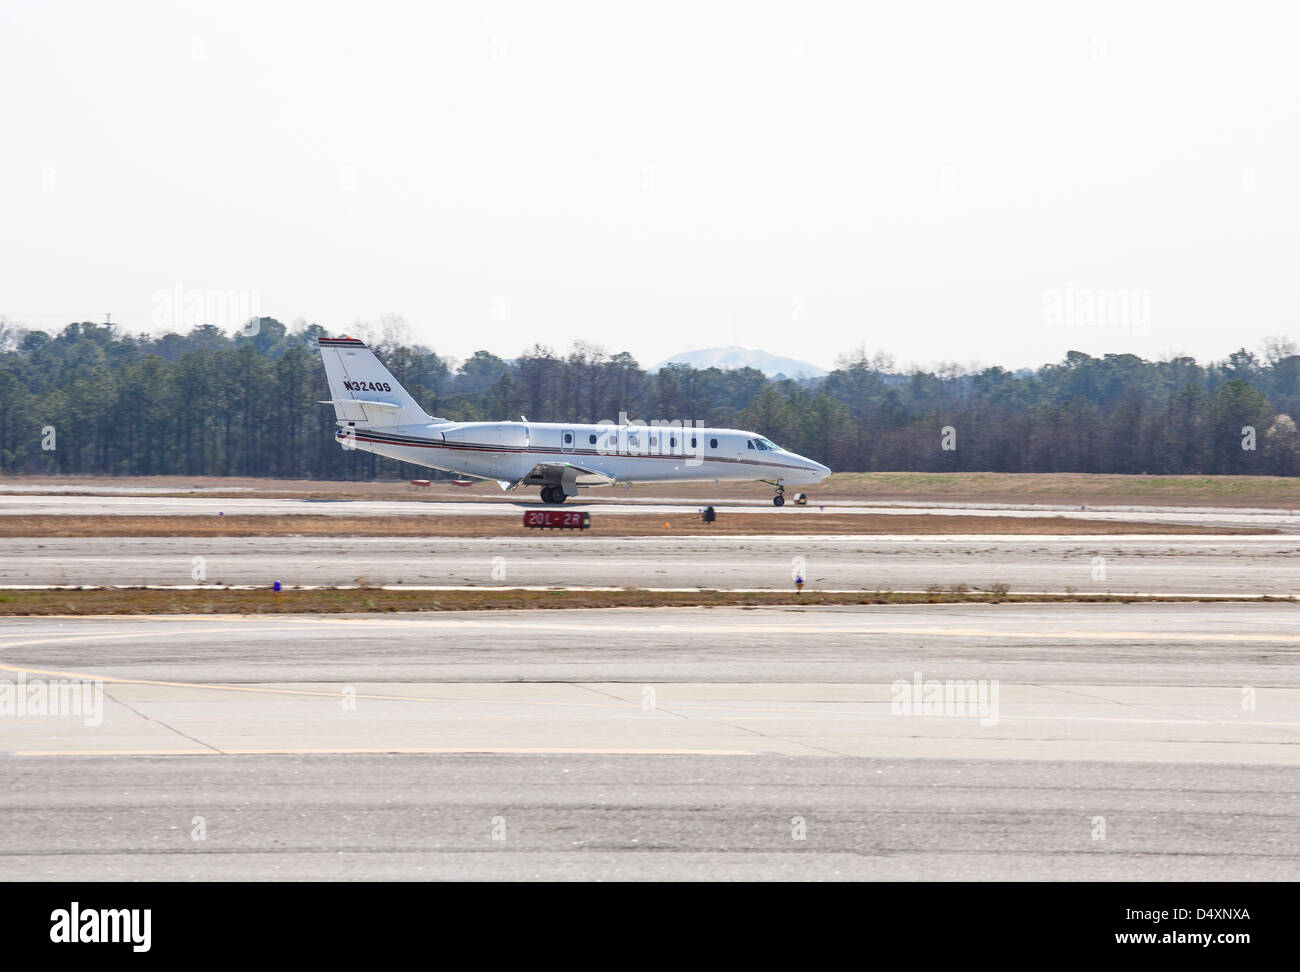 A white Cessna Citation turbo-fan jet taxiing down a runway at a regional airport Stock Photo